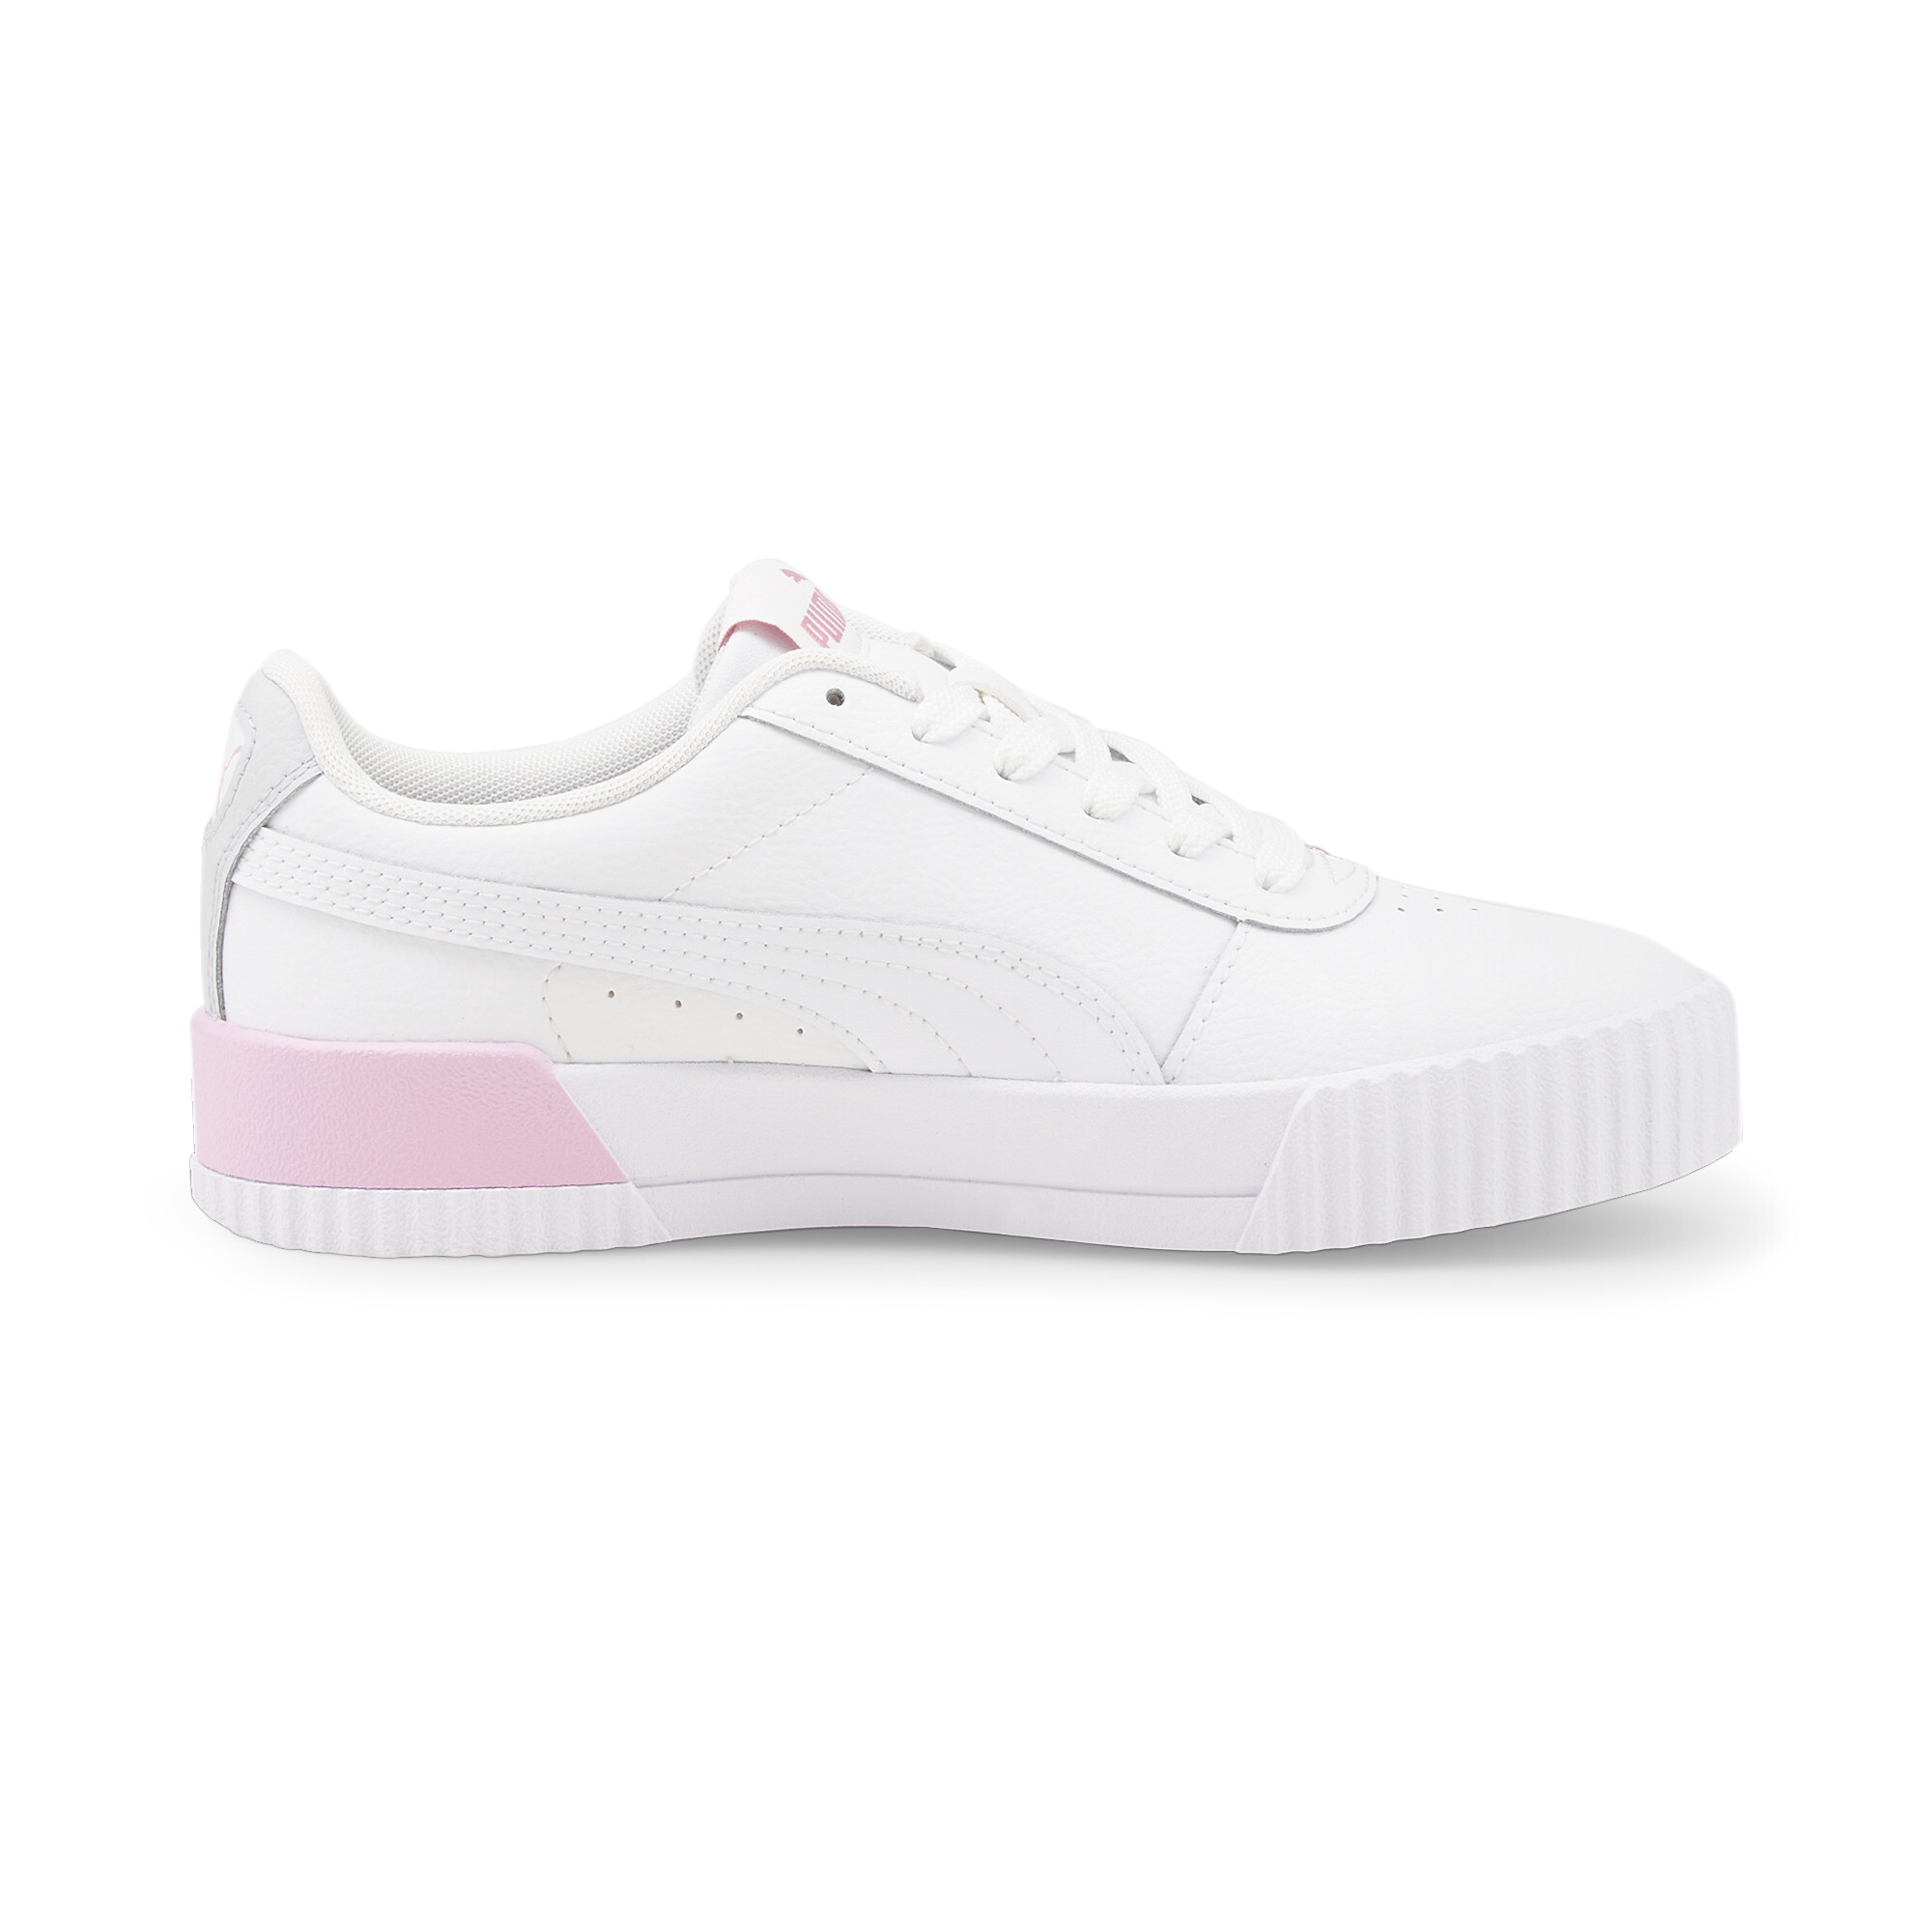 PUMA Junior Girls' Carina Sneakers Clothing, Shoes & Accessories